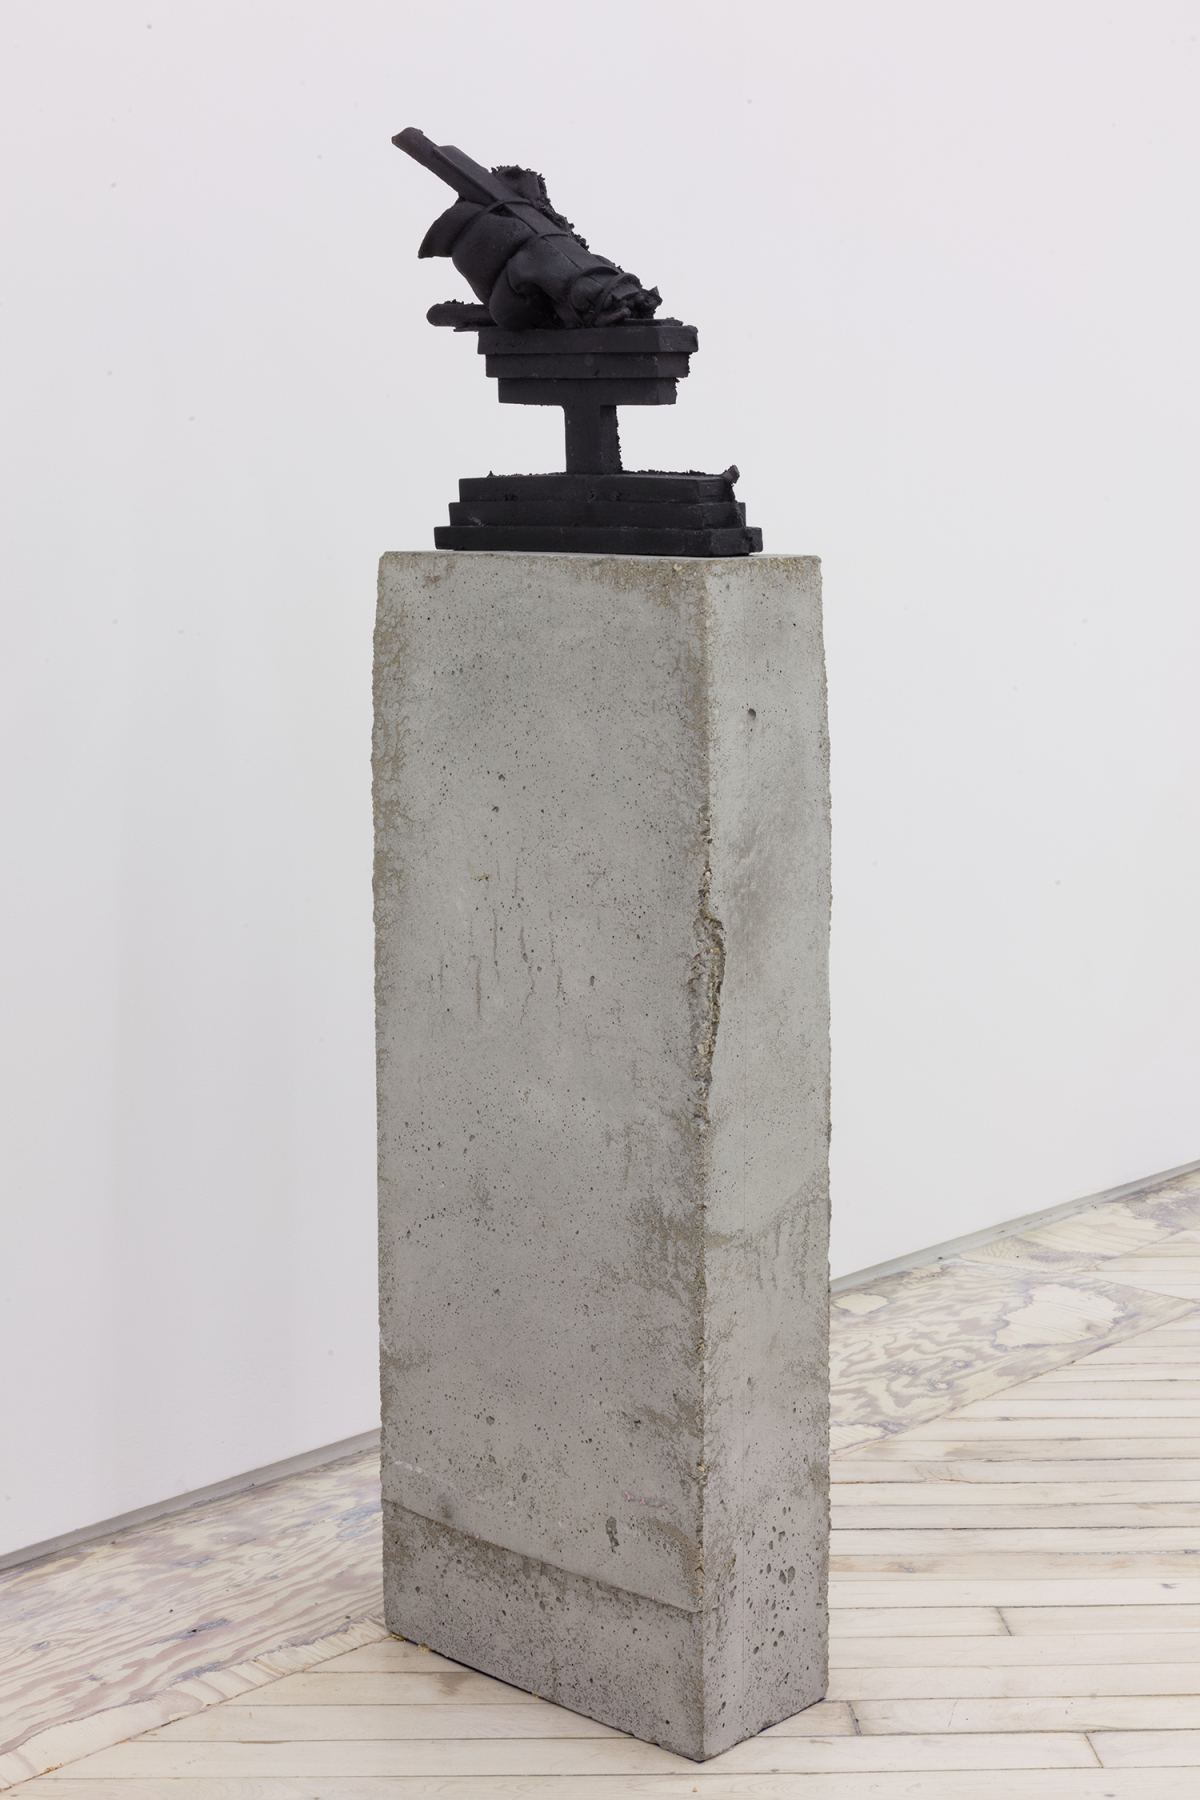 Installation view of cast iron and concrete sculpture resting on the floor, depicting a tiered geometric form on top of a tall concrete plinth.